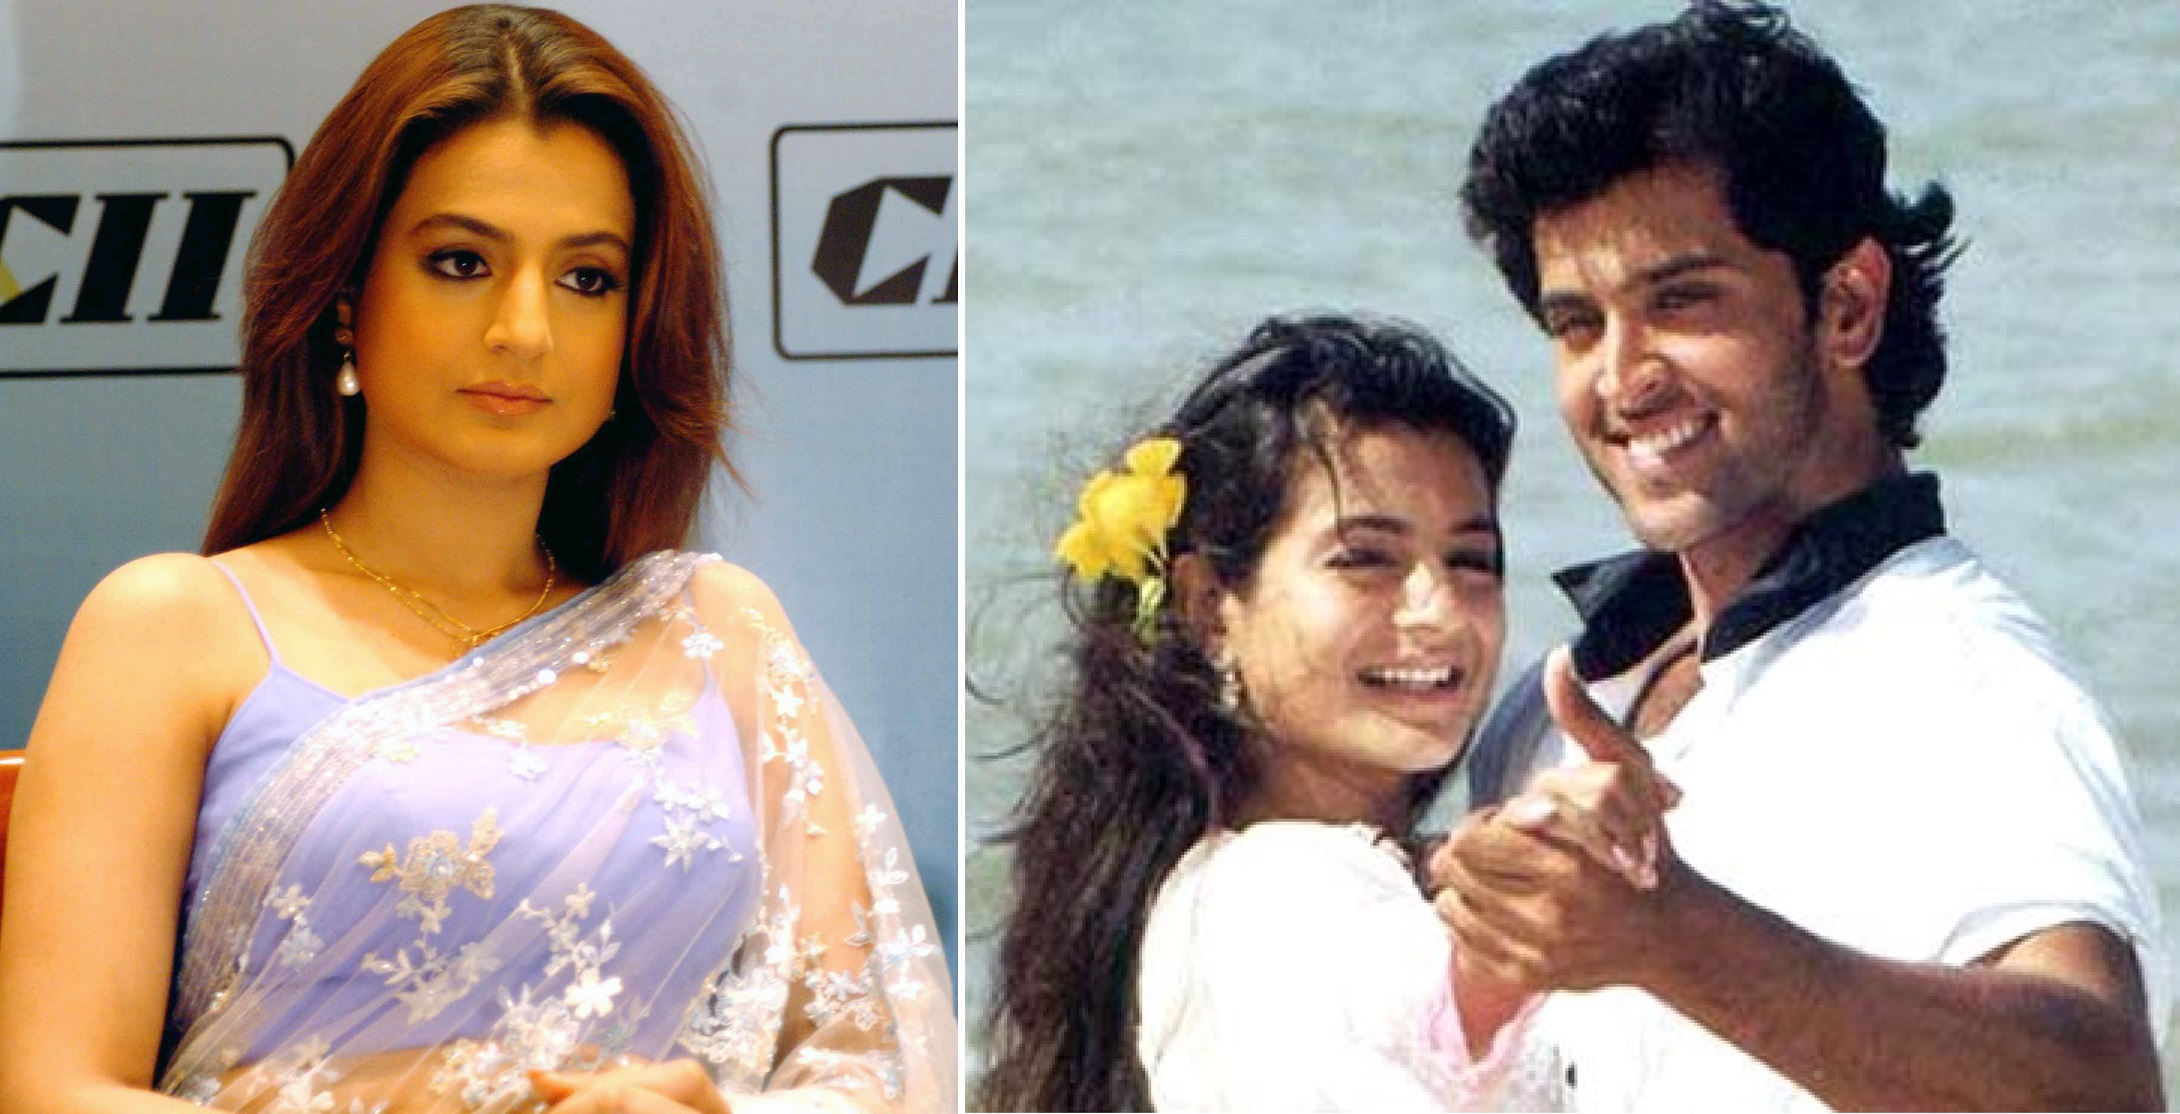 Fan Calls Ameesha Patel ‘Flop Actress’, But She Actually Delivered Some Of The Biggest Hits Of Bollywood In The 2000’s